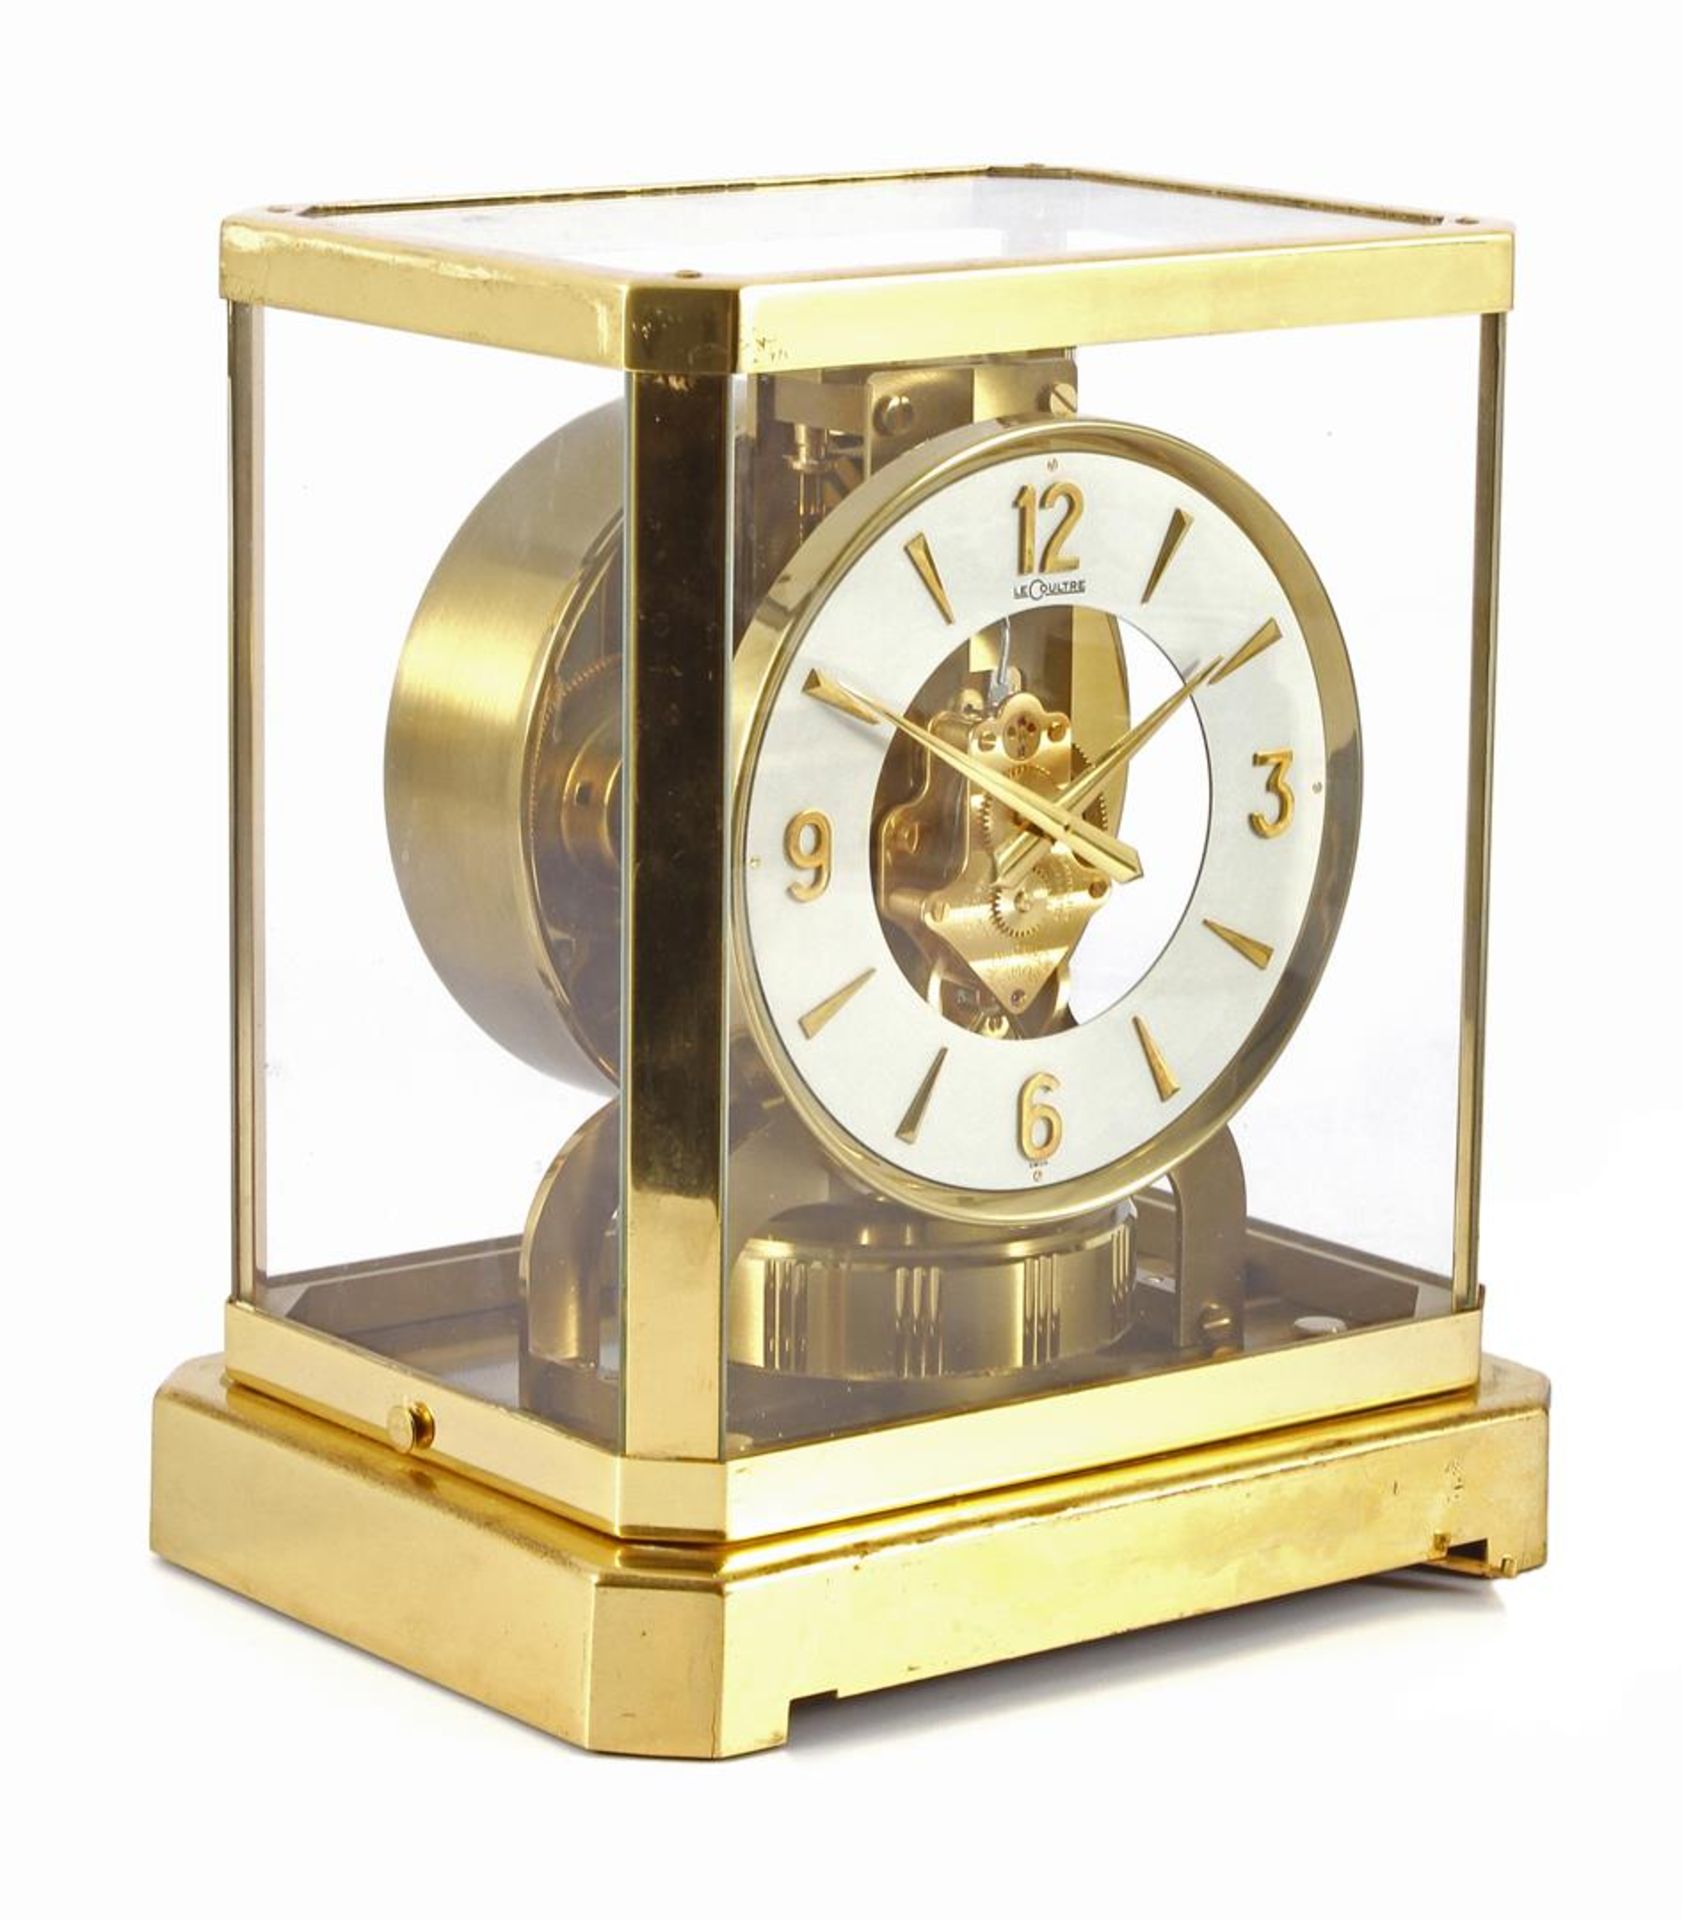 Jaeger and Le Coultre Atmos table clock, timepiece number 212357, late 1960s, 23.5 cm high, 21 cm